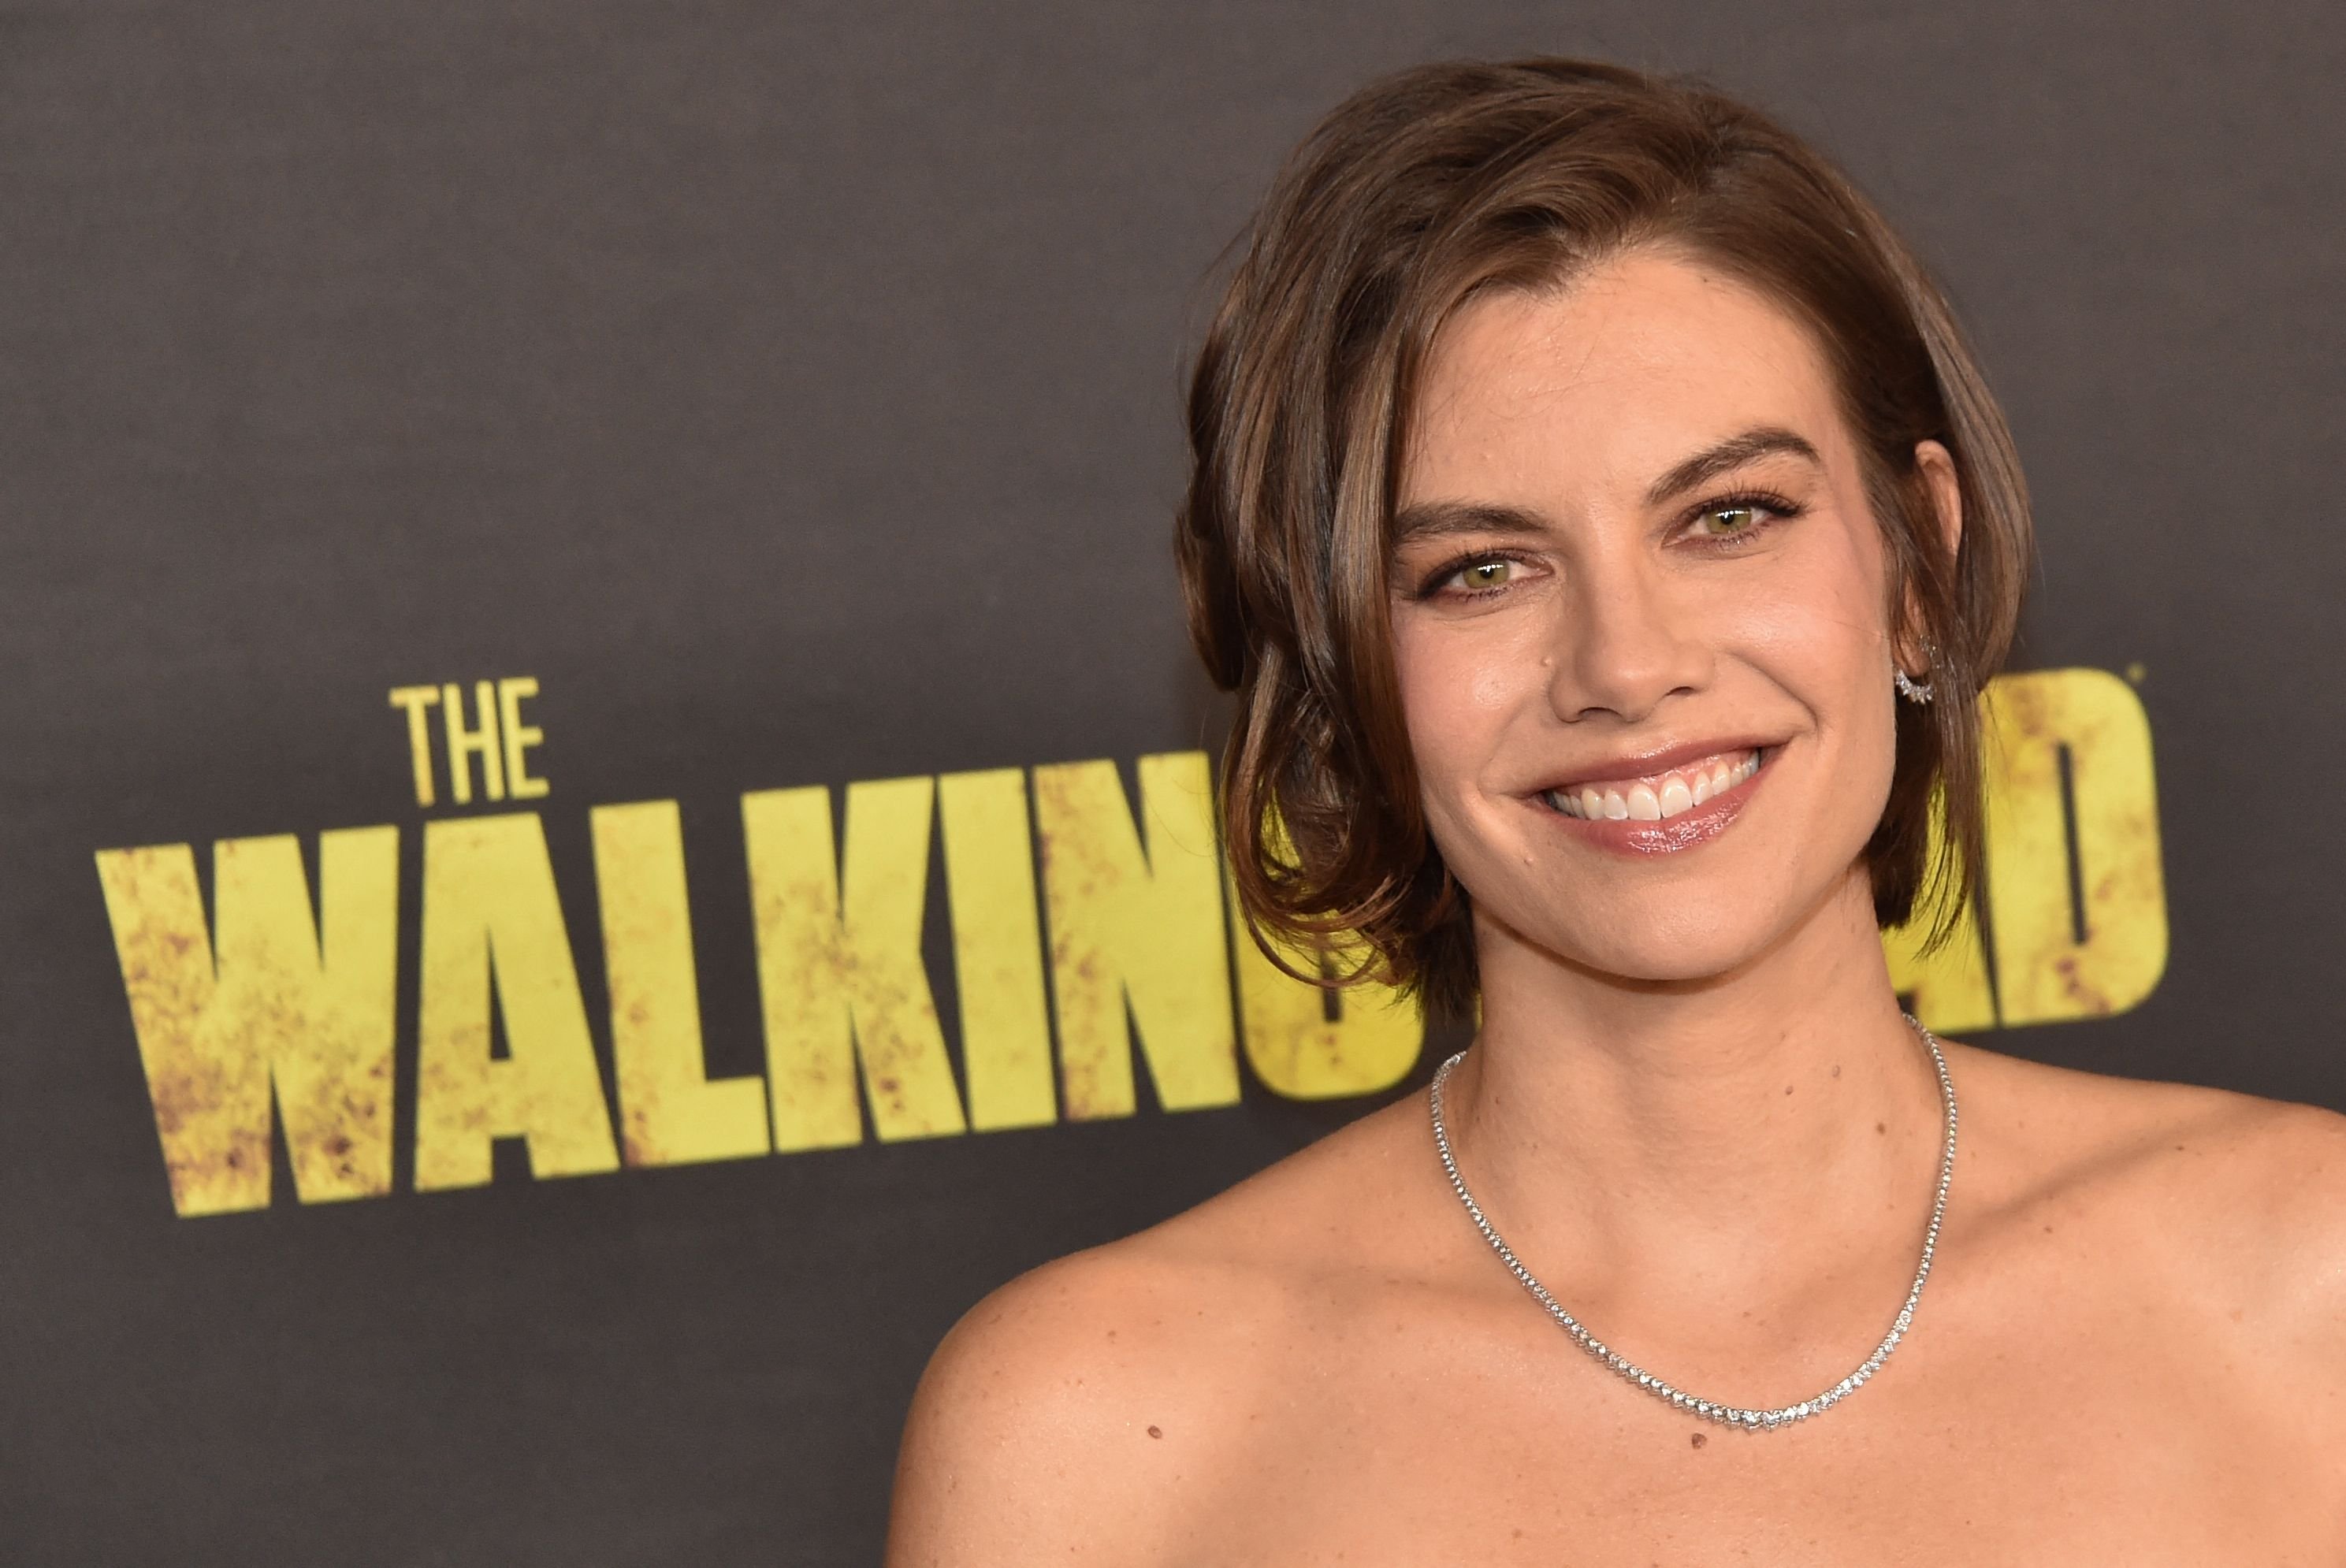 Lauren Cohan arrives for the "The Walking Dead" series finale event at the Orpheum Theater in Los Angeles, on November 20, 2022. | Source: Getty Images